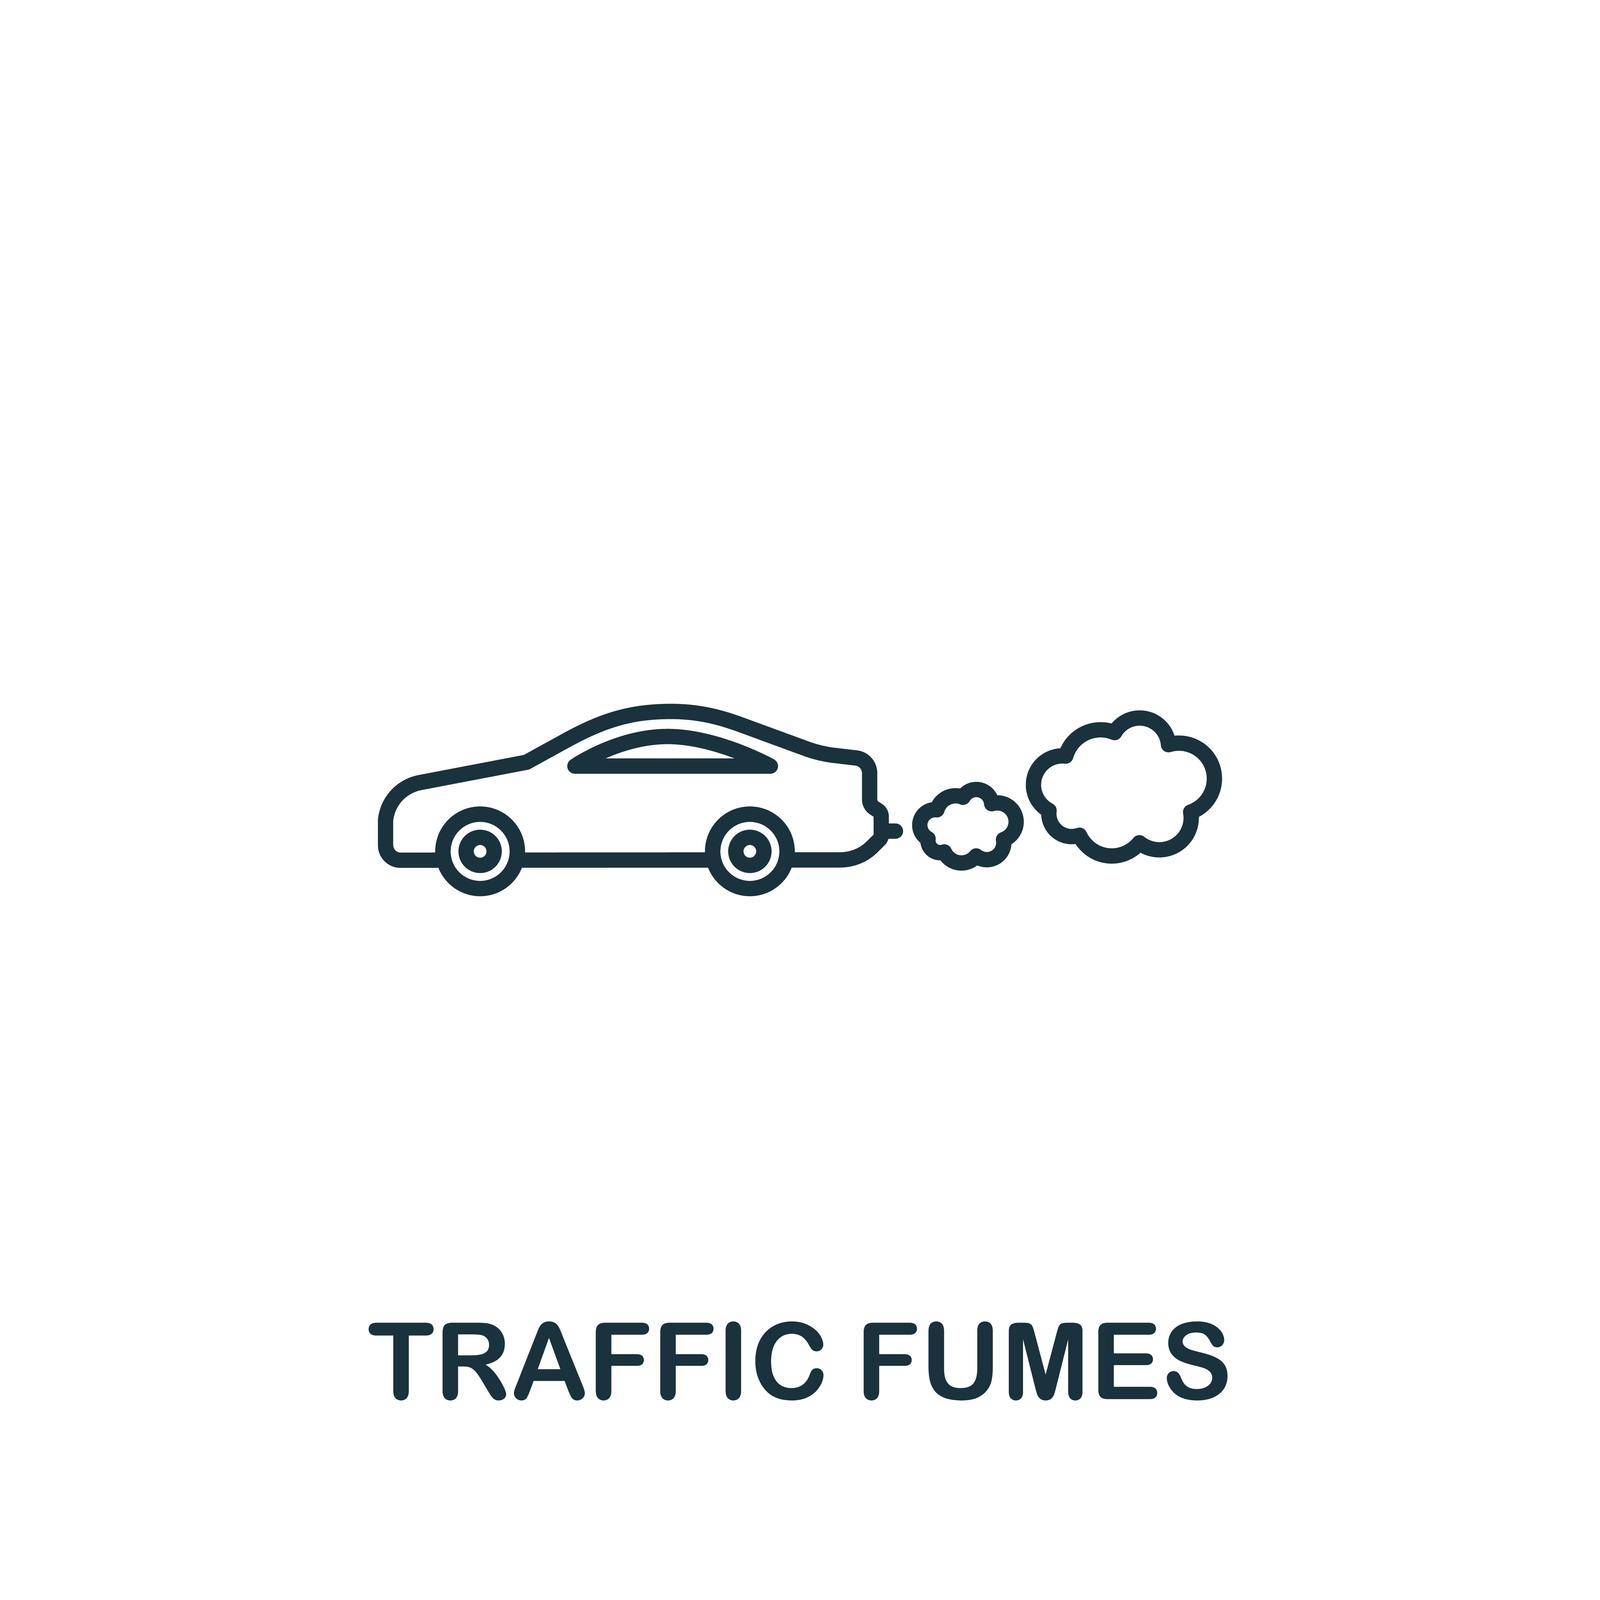 Traffic Fumes icon. Monochrome simple icon for templates, web design and infographics by simakovavector